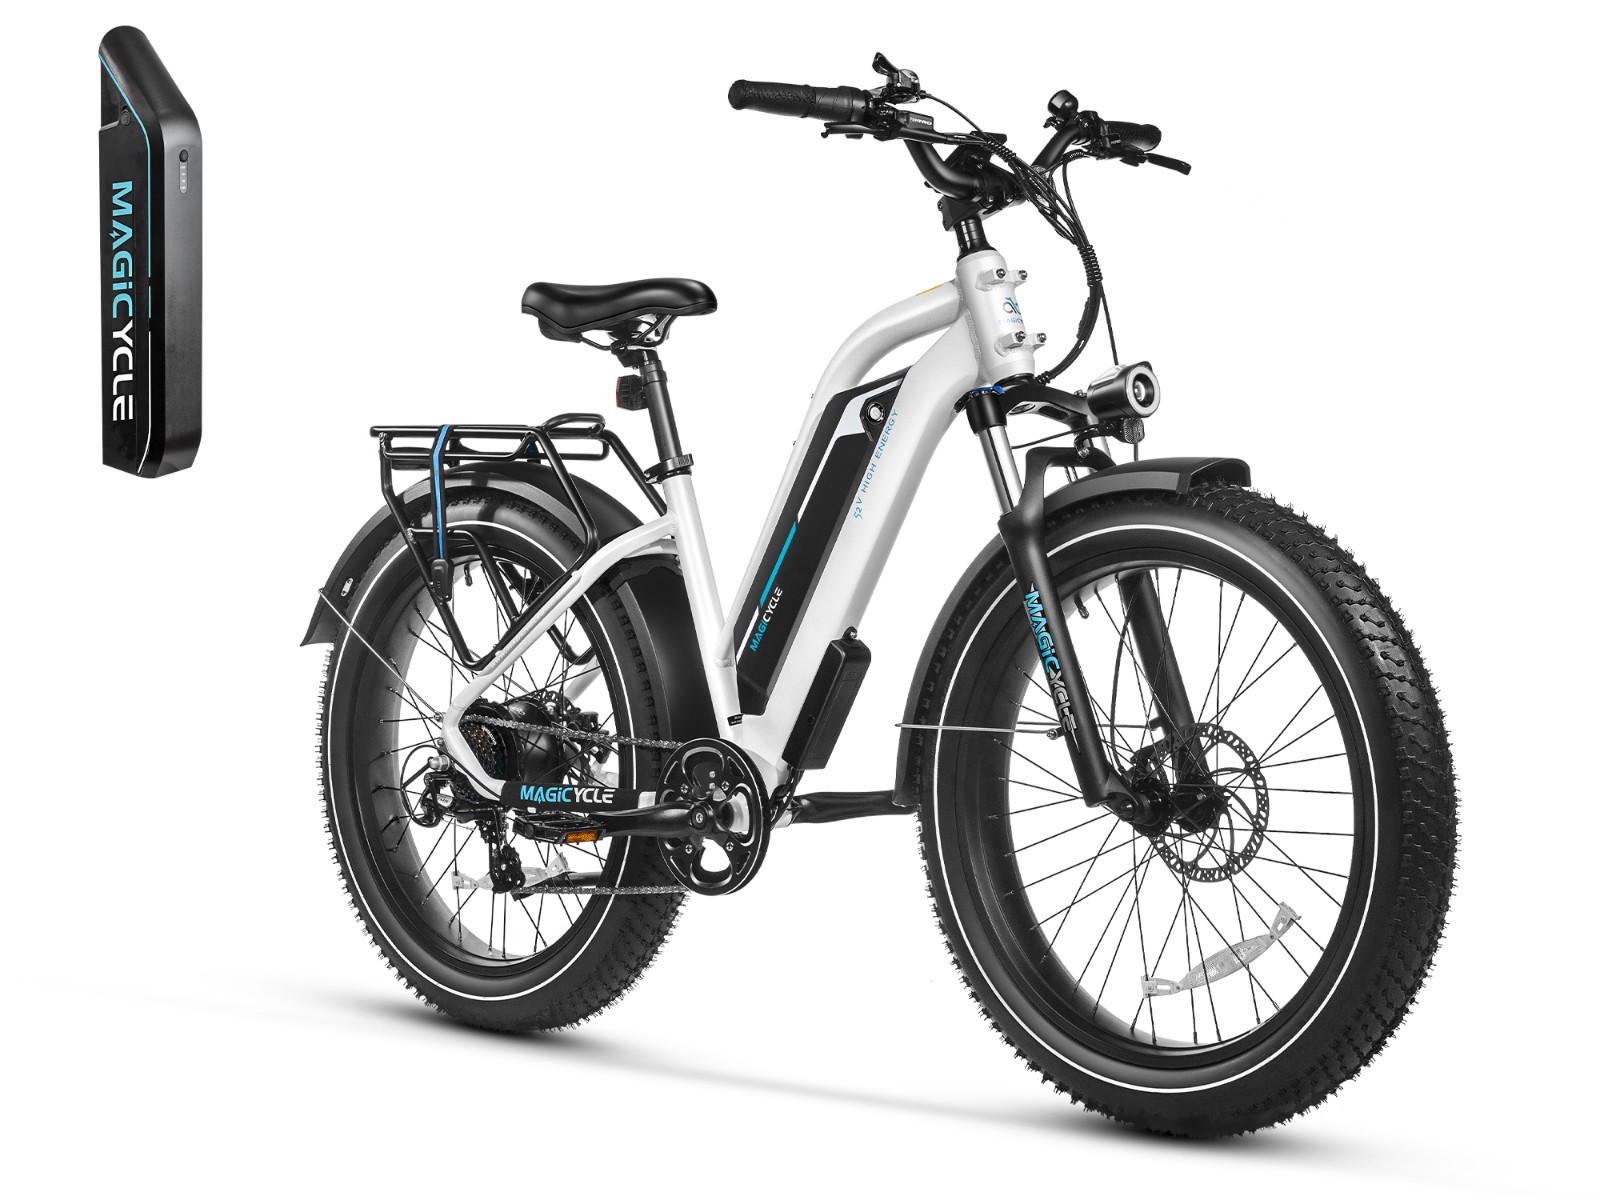 Combo Sale - Magicycle Cruiser Pro Step-thru  20Ah Ebike with Second 52V 15Ah Battery - Canada Only